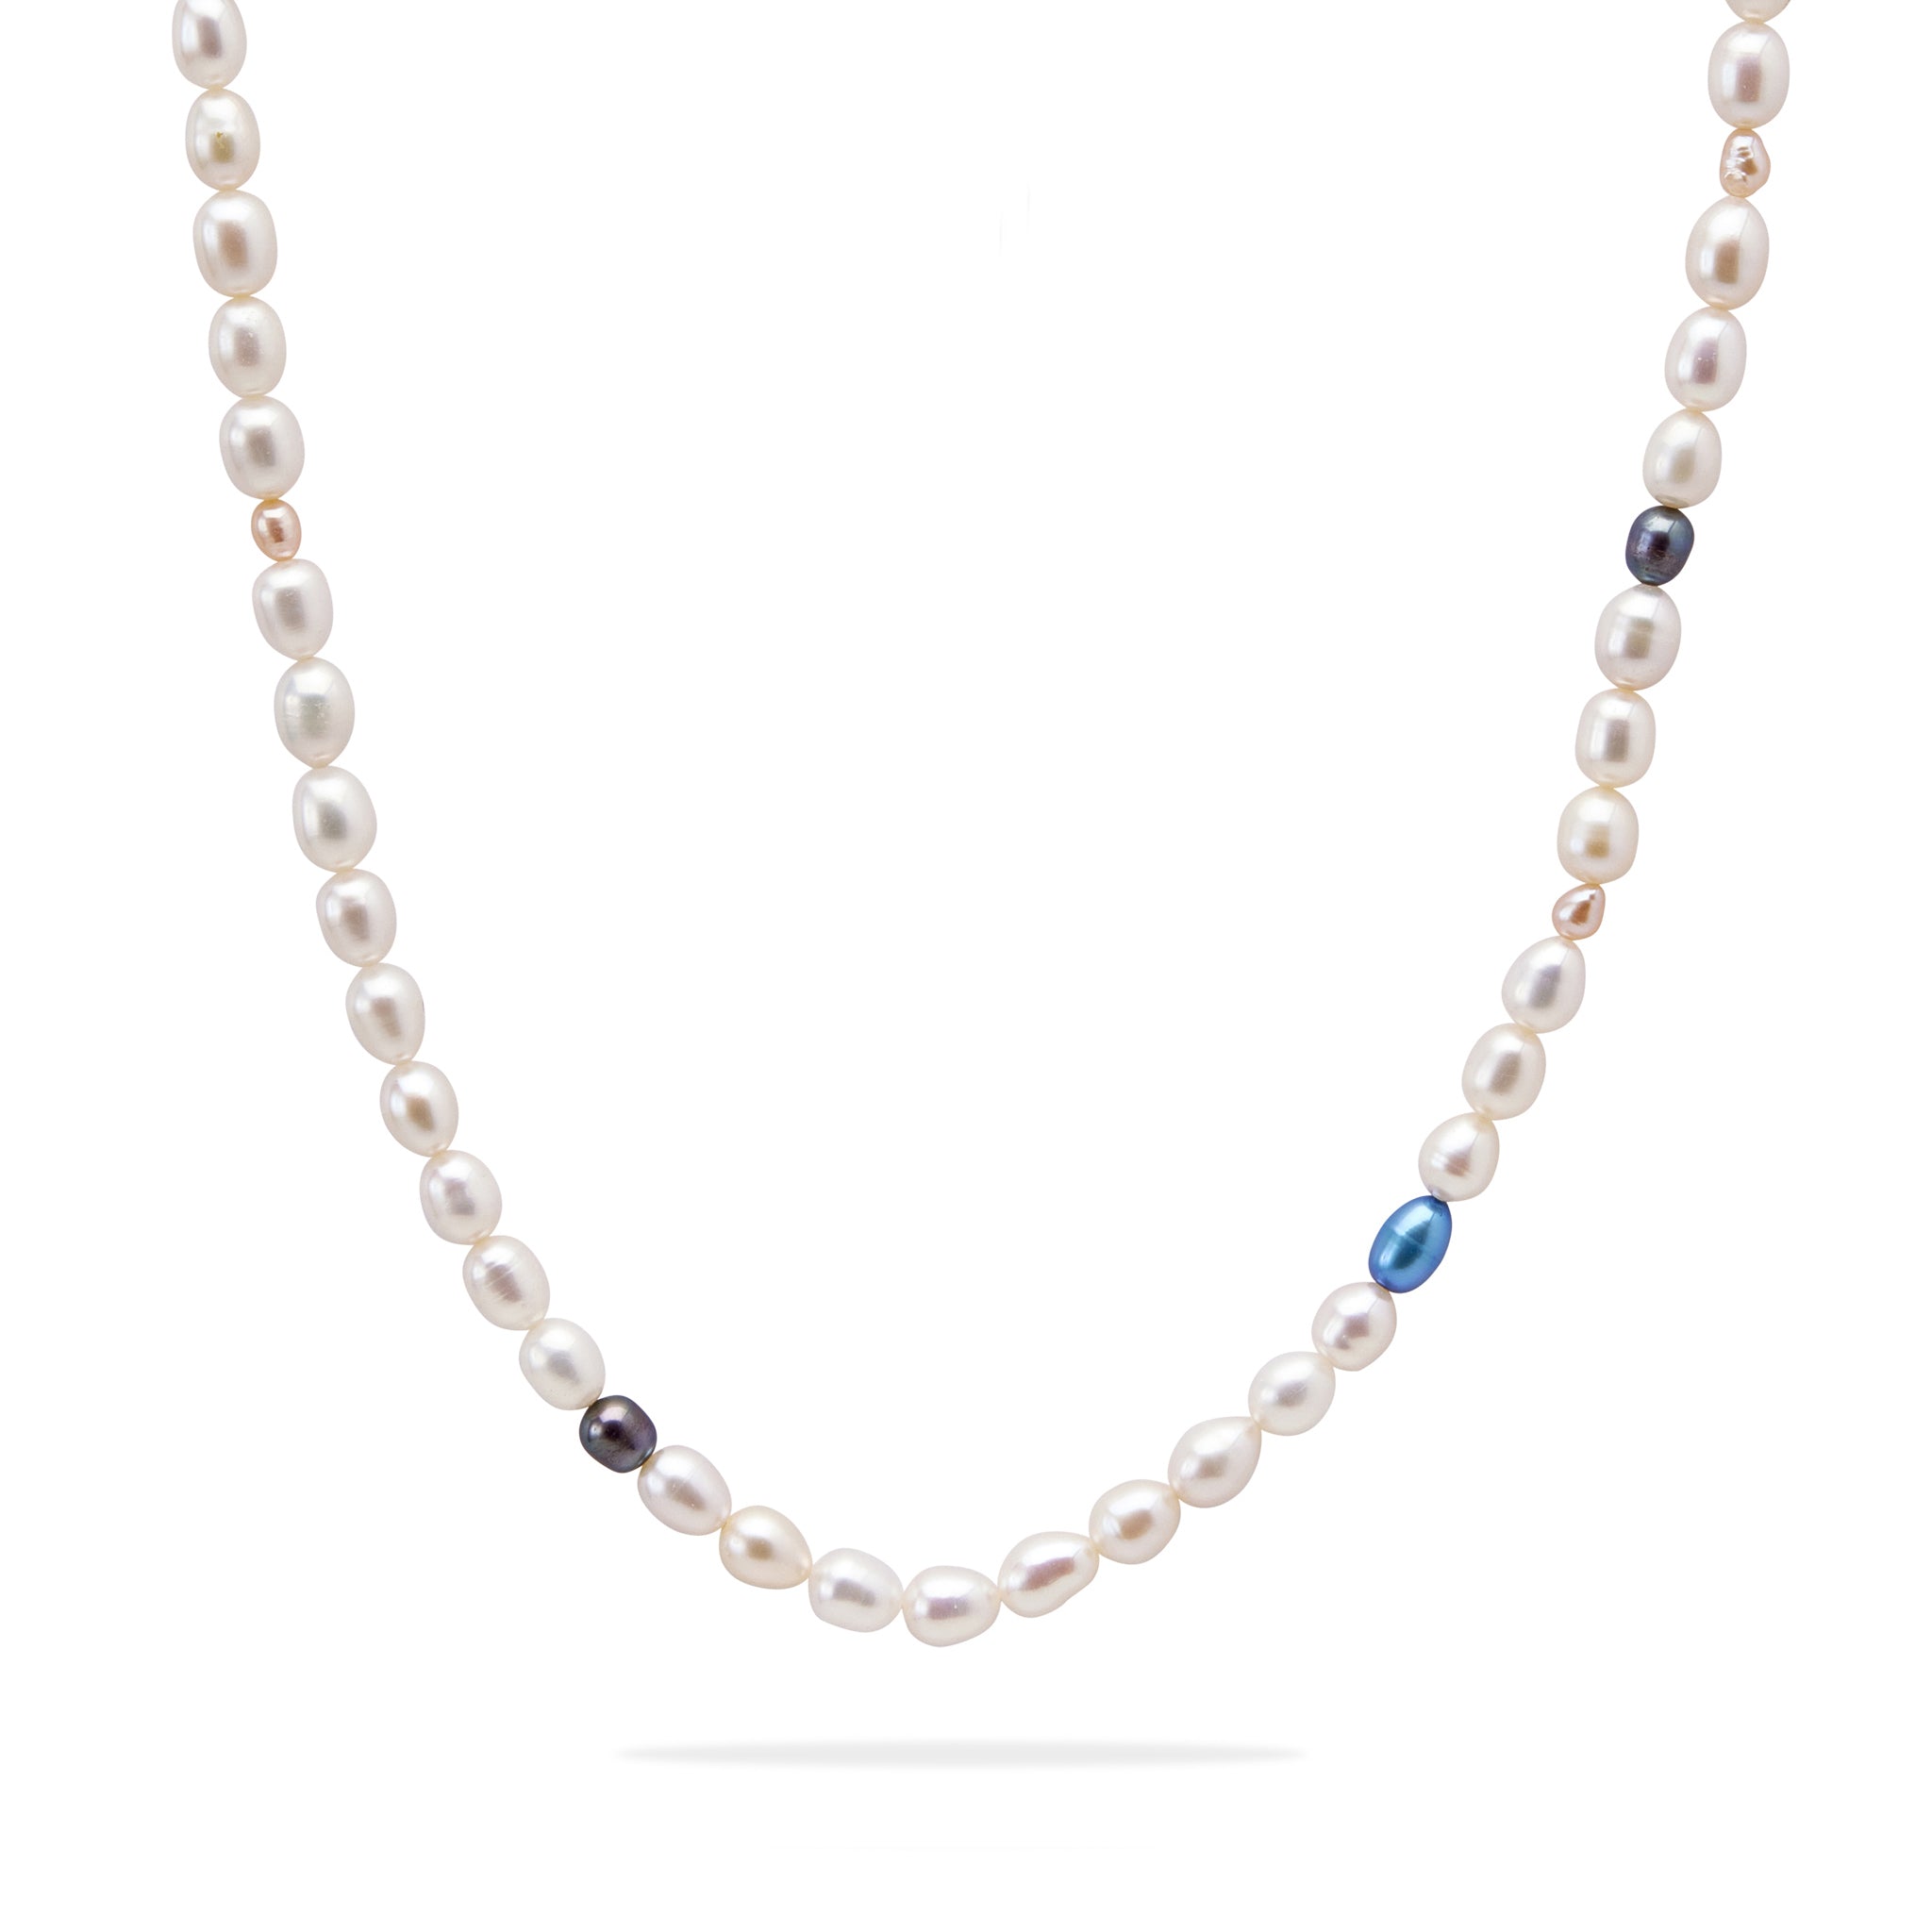 Pearl_Necklace_04.jpg